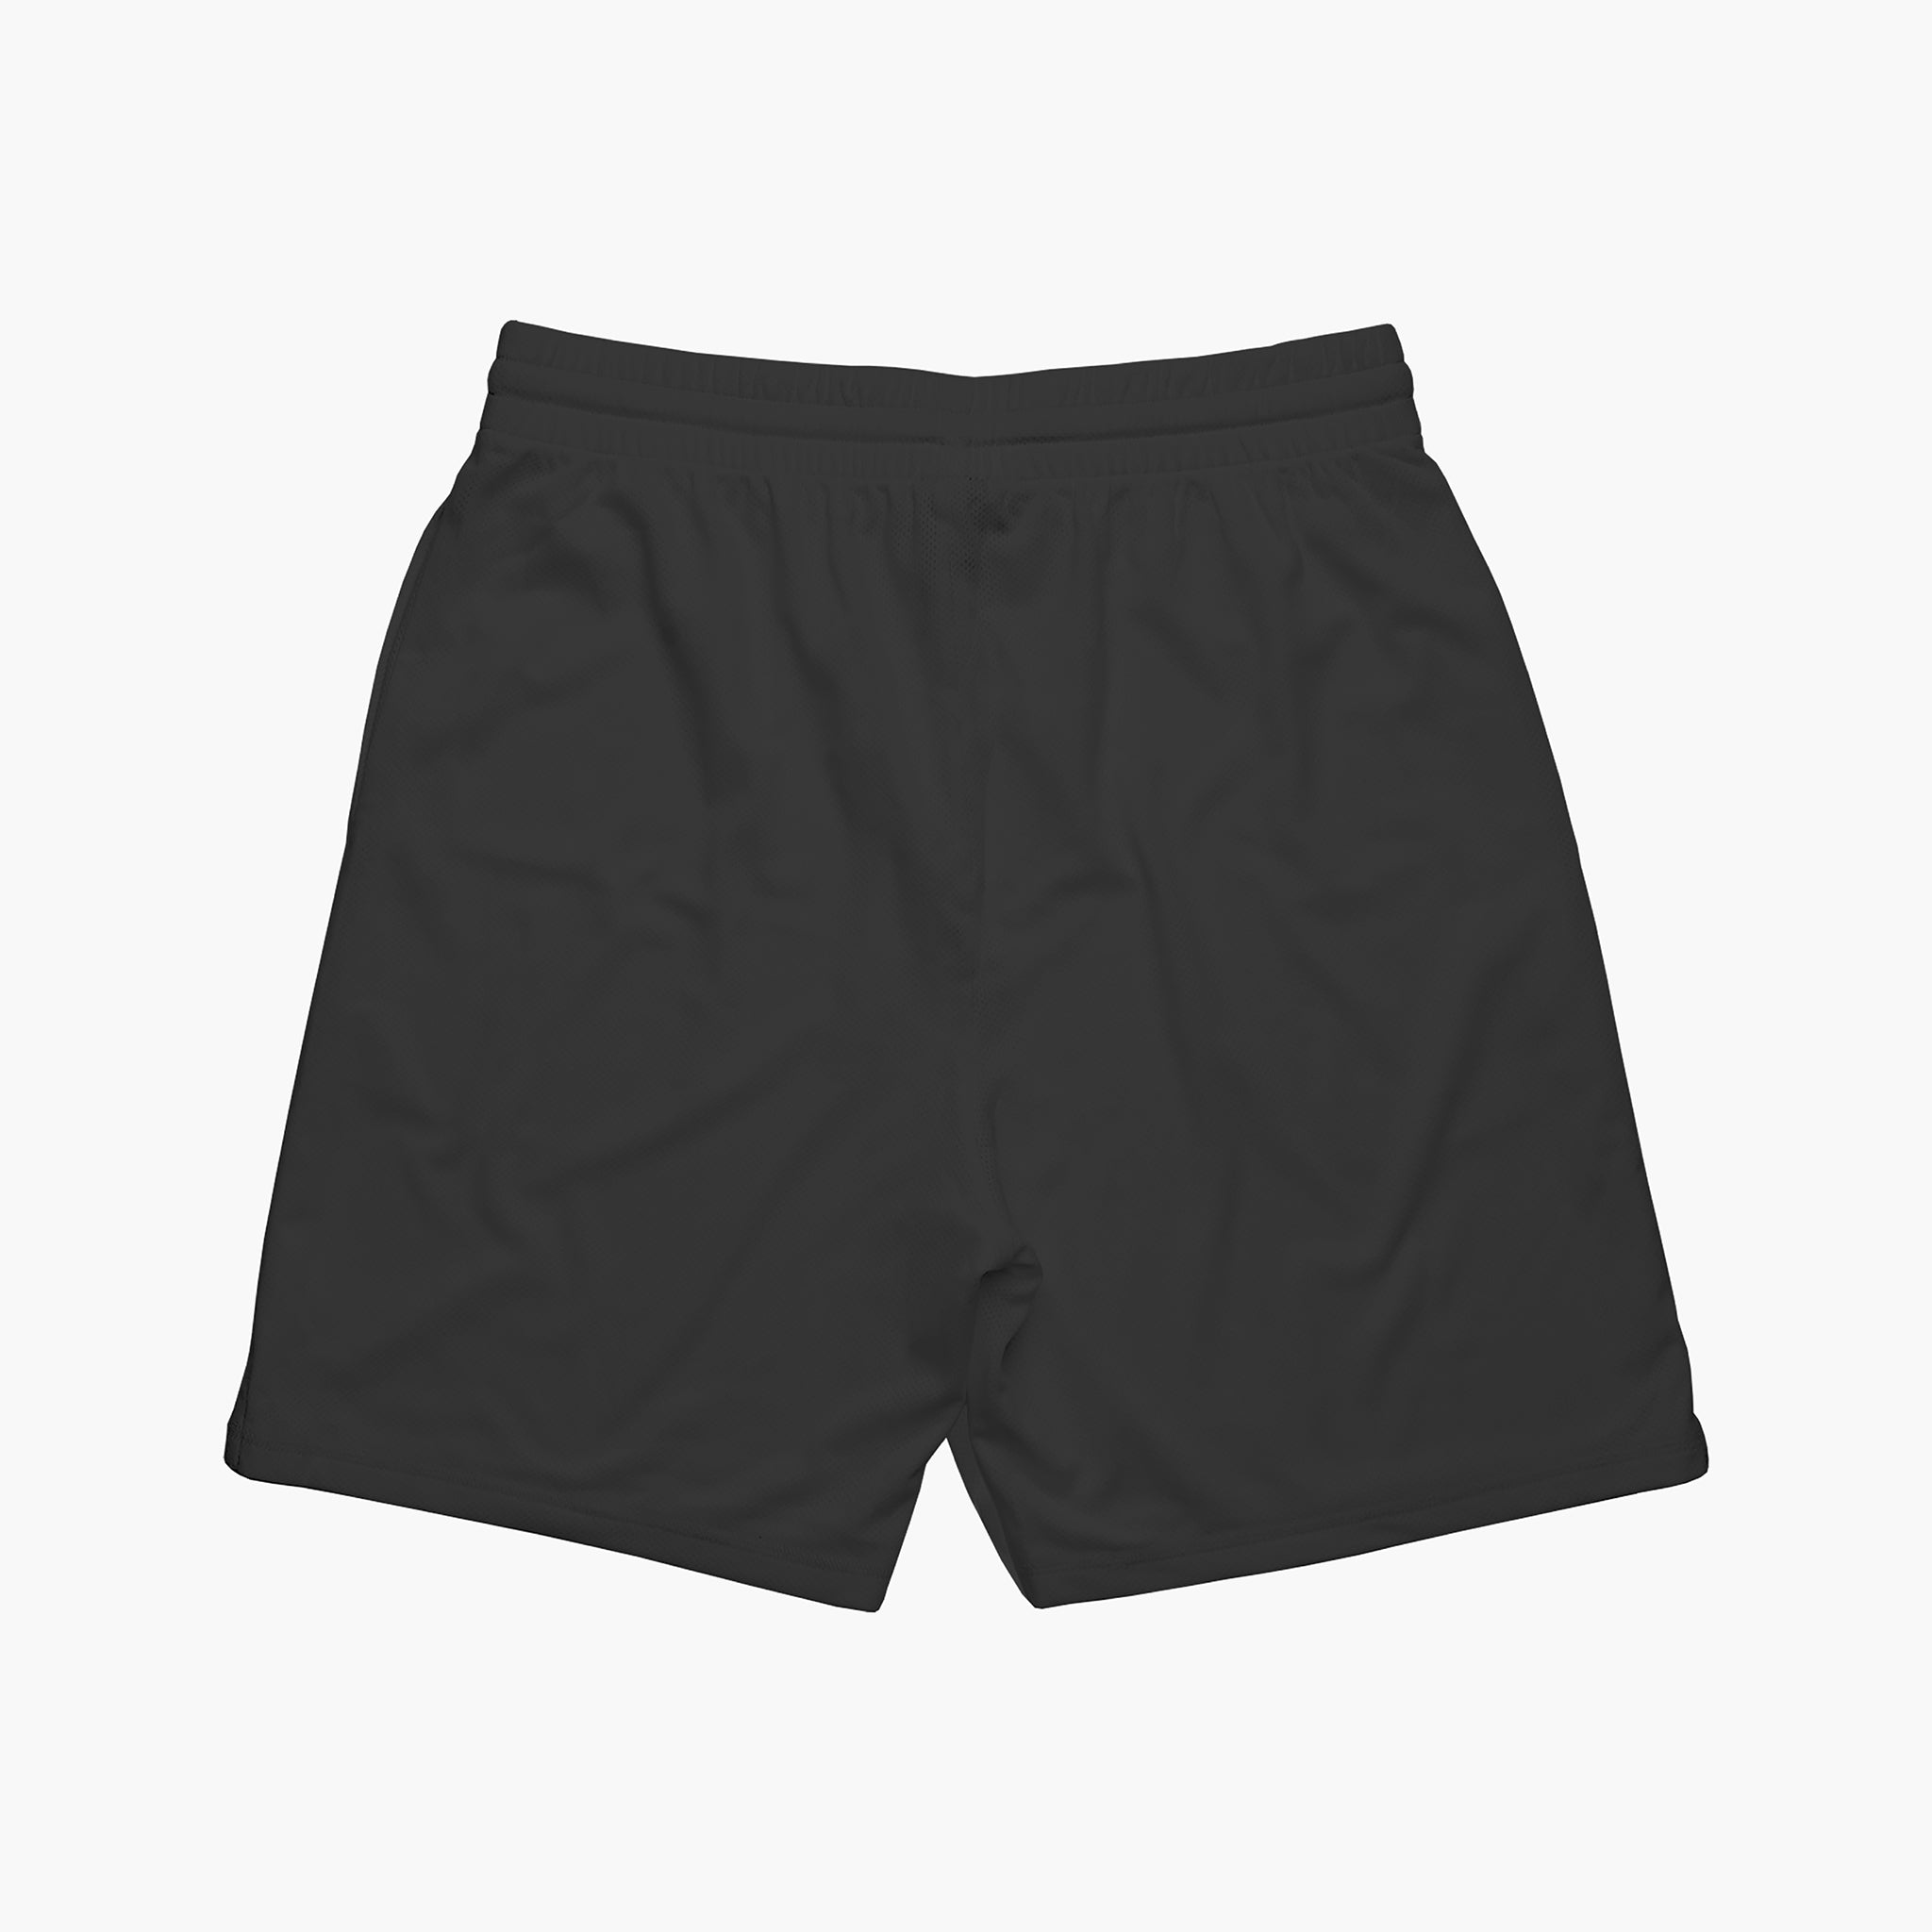 Yellowstone Stadium Shorts - Frequently Asked Questions